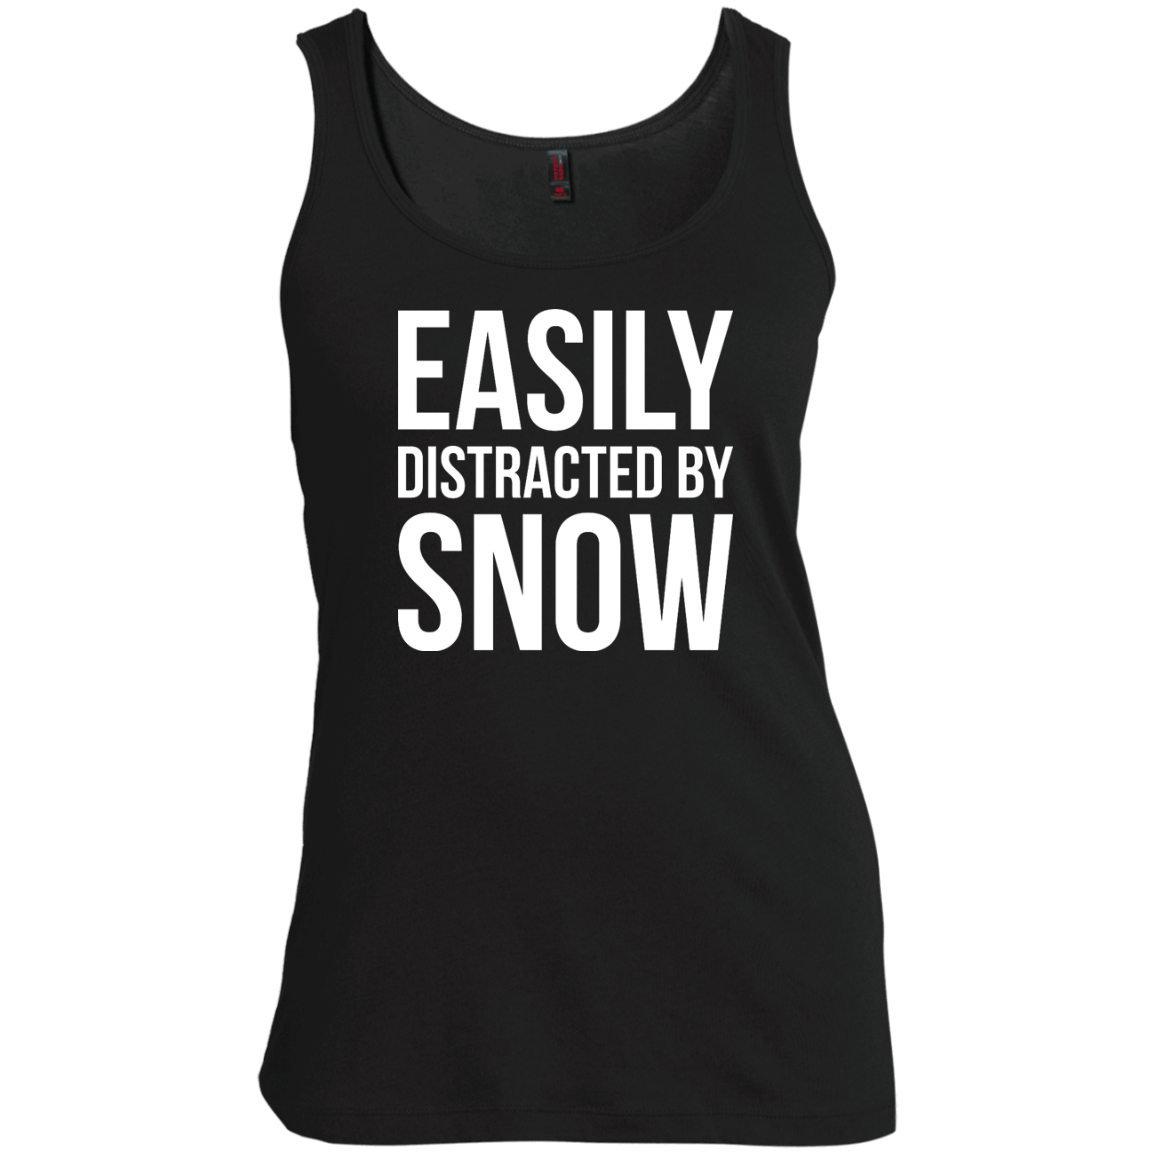 Easily Distracted By Snow Tank Tops - Powderaddicts